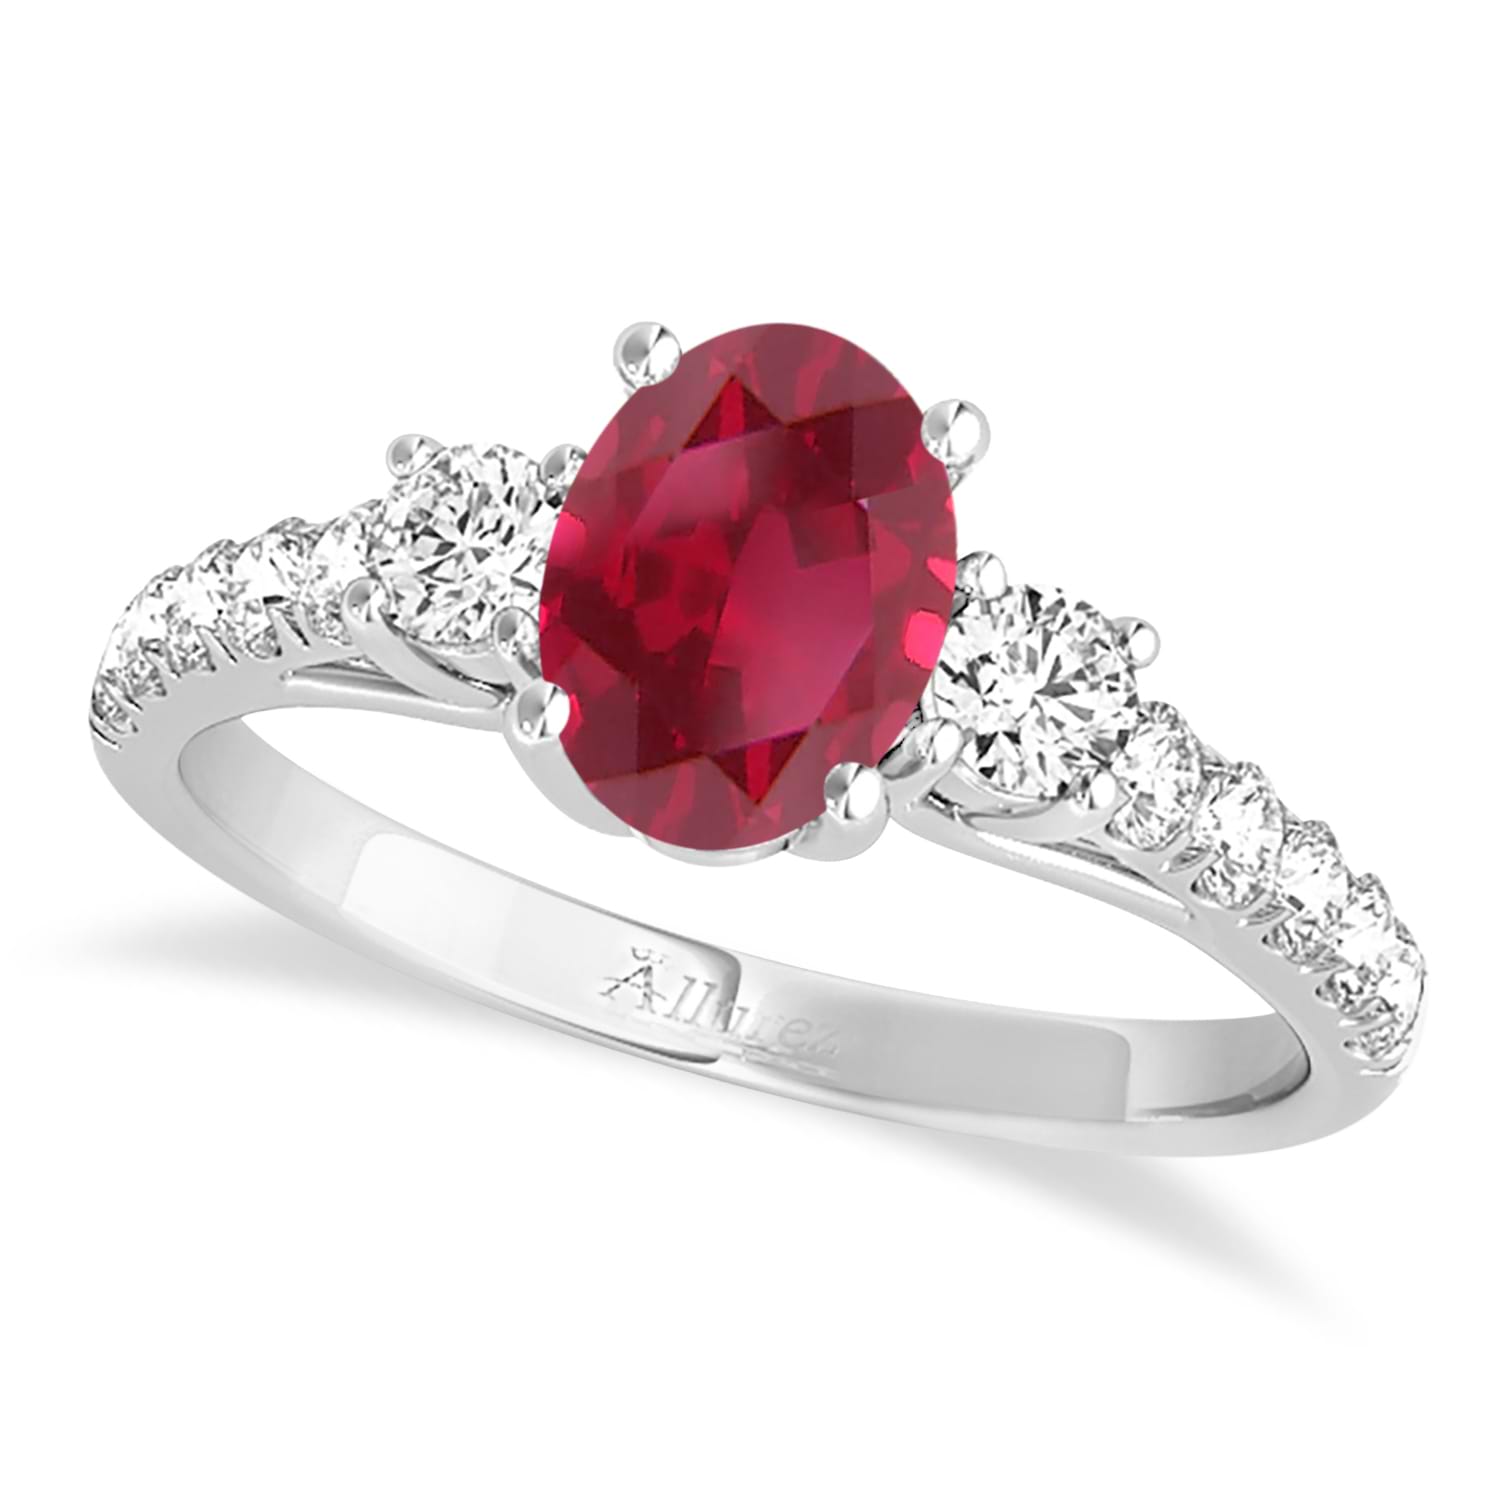 Oval Cut Ruby & Diamond Engagement Ring 14k White Gold (1.40ct)